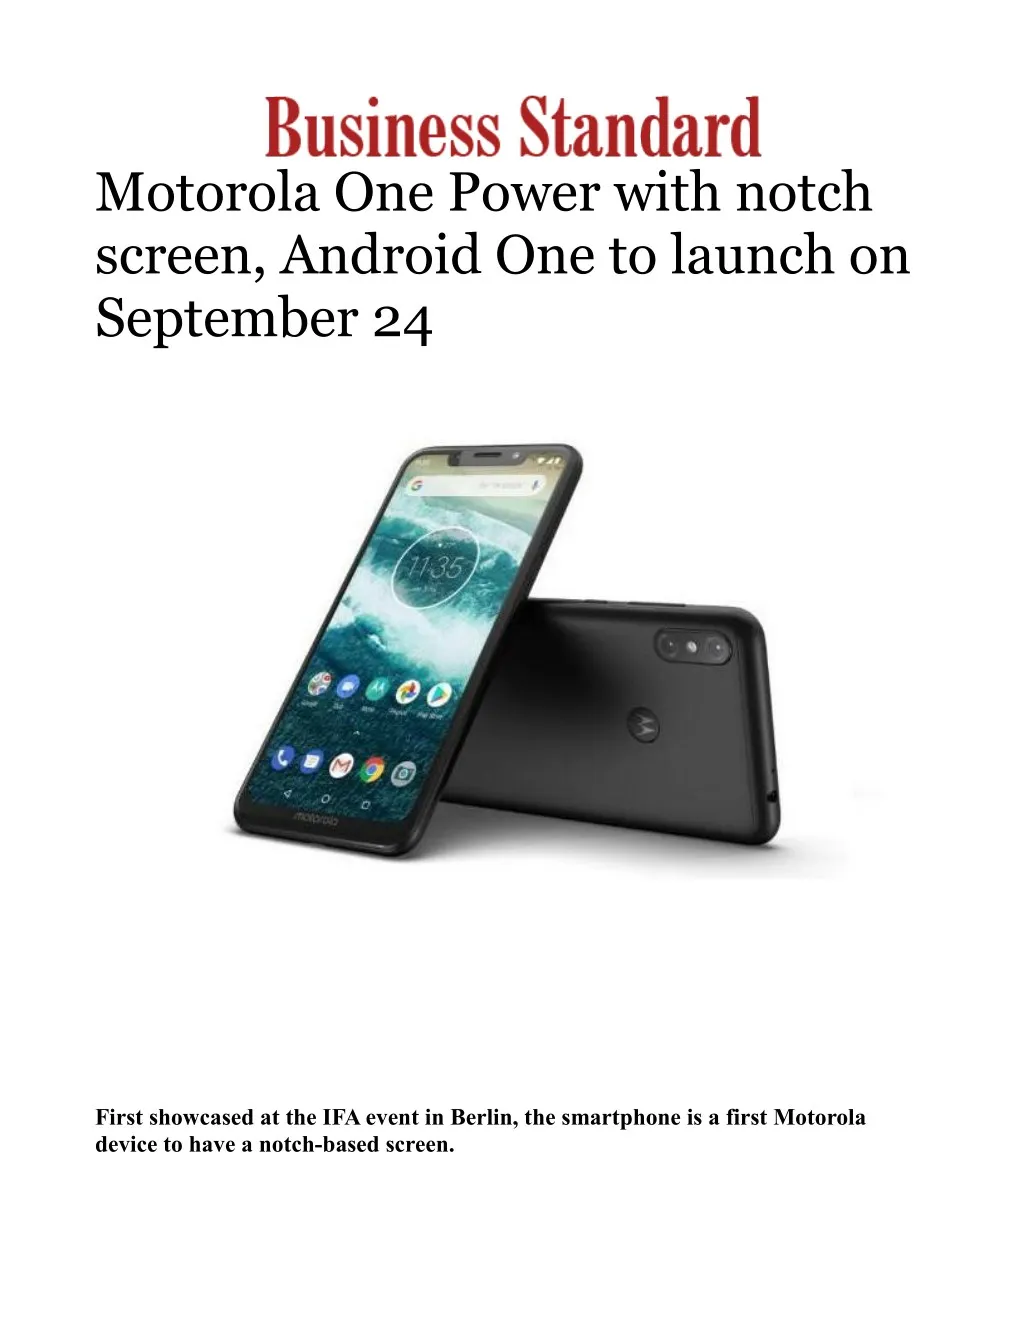 motorola one power with notch screen android